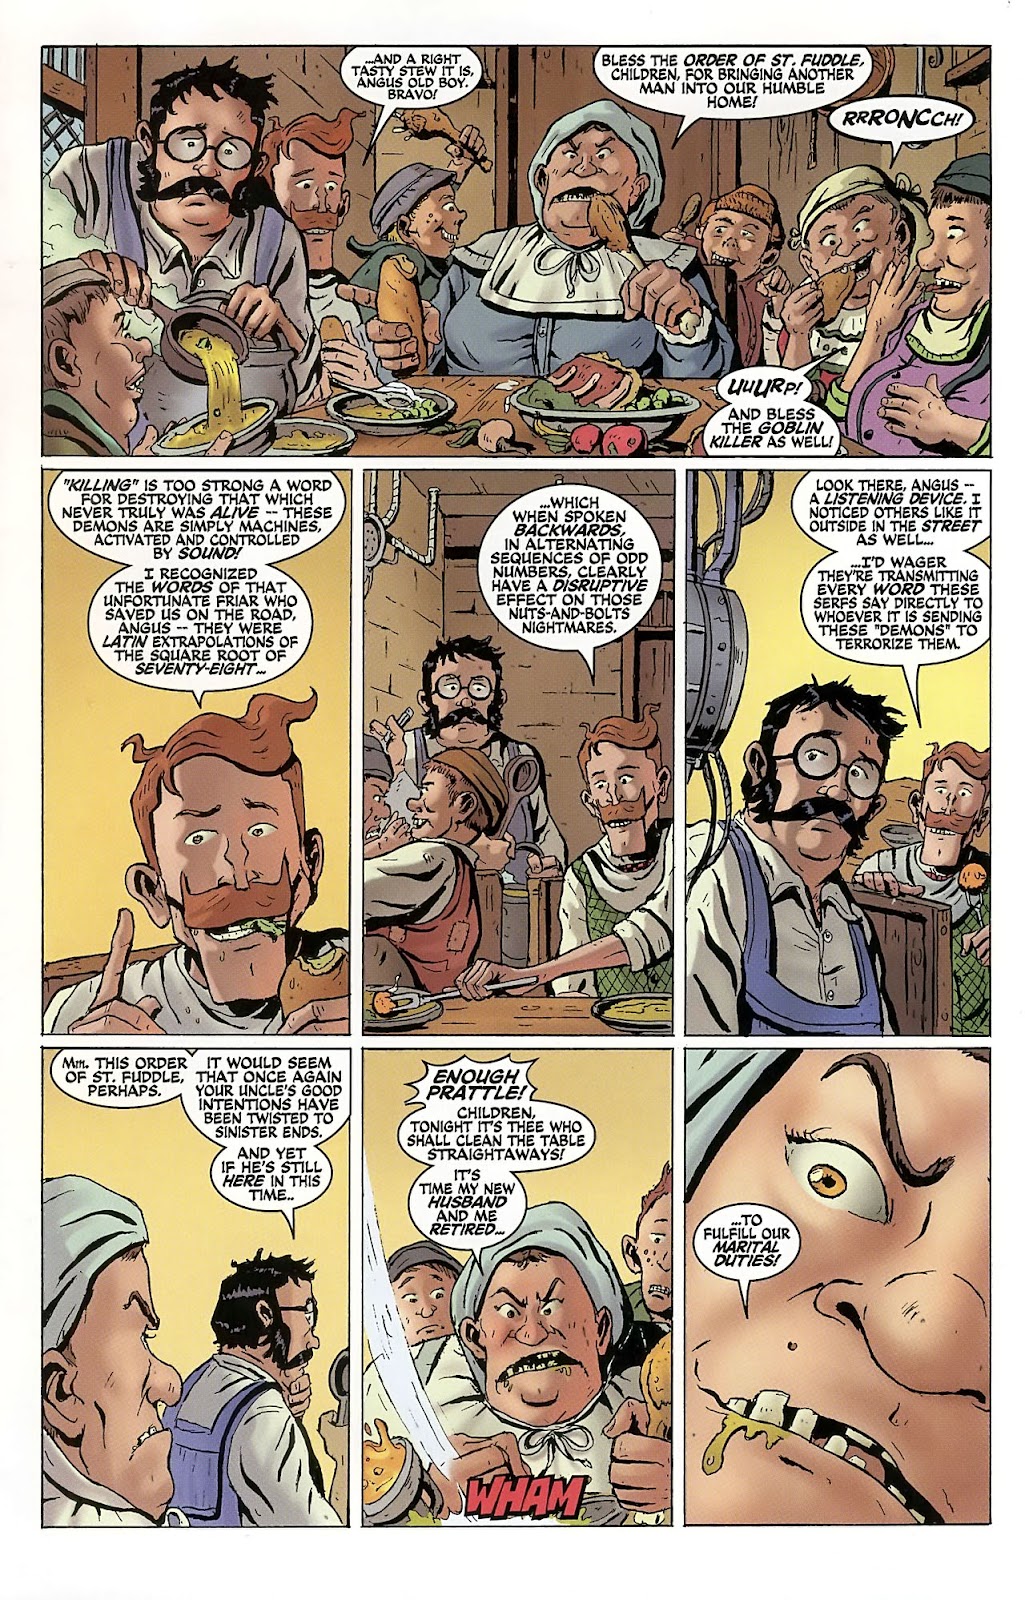 The Remarkable Worlds of Professor Phineas B. Fuddle issue 4 - Page 10